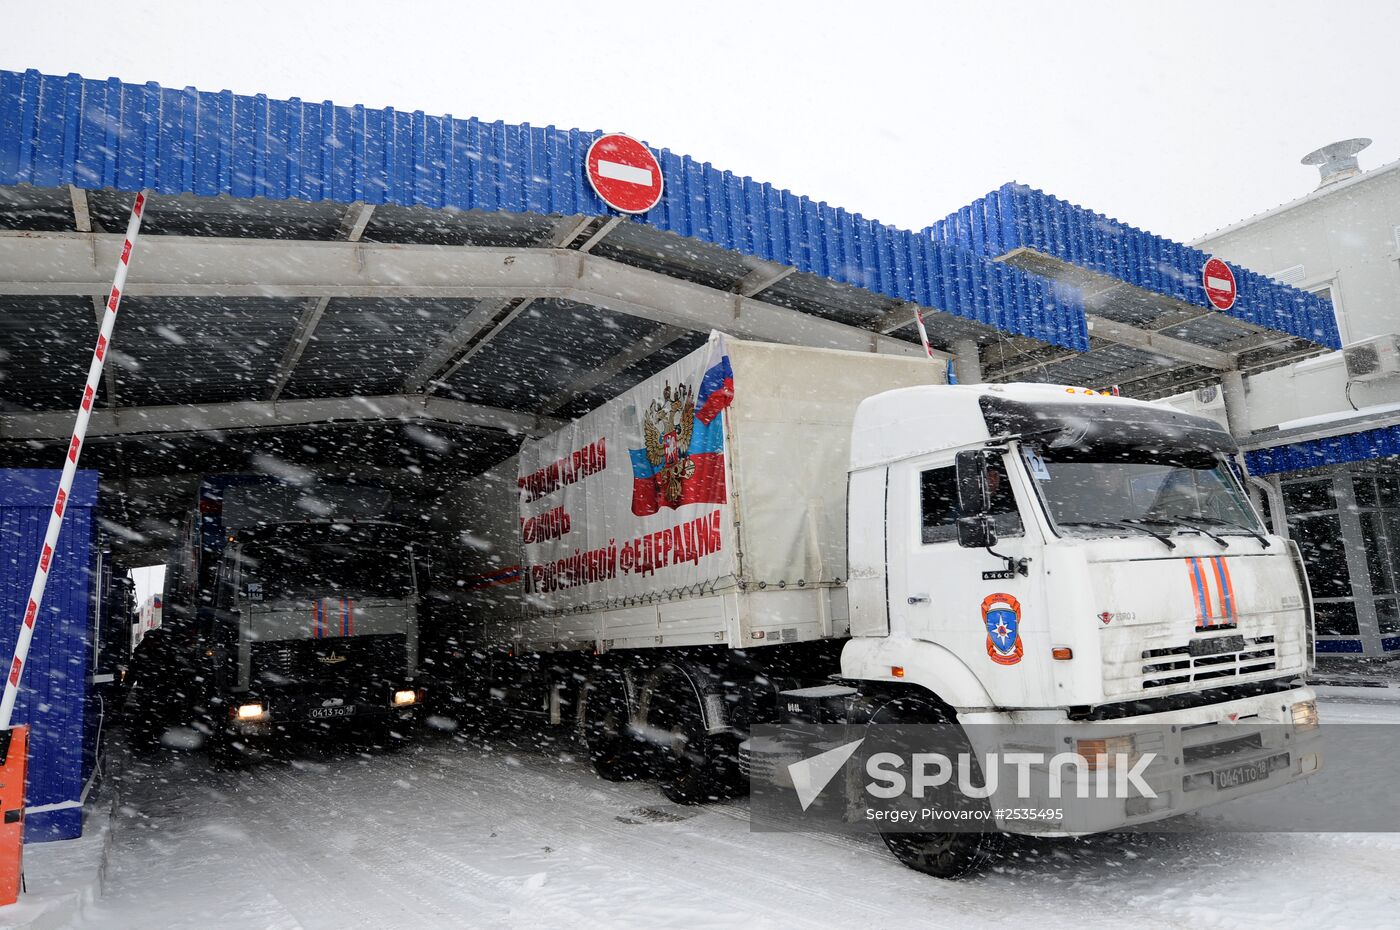 Russia's eighth humanitarian convoy carries aid for Donbas